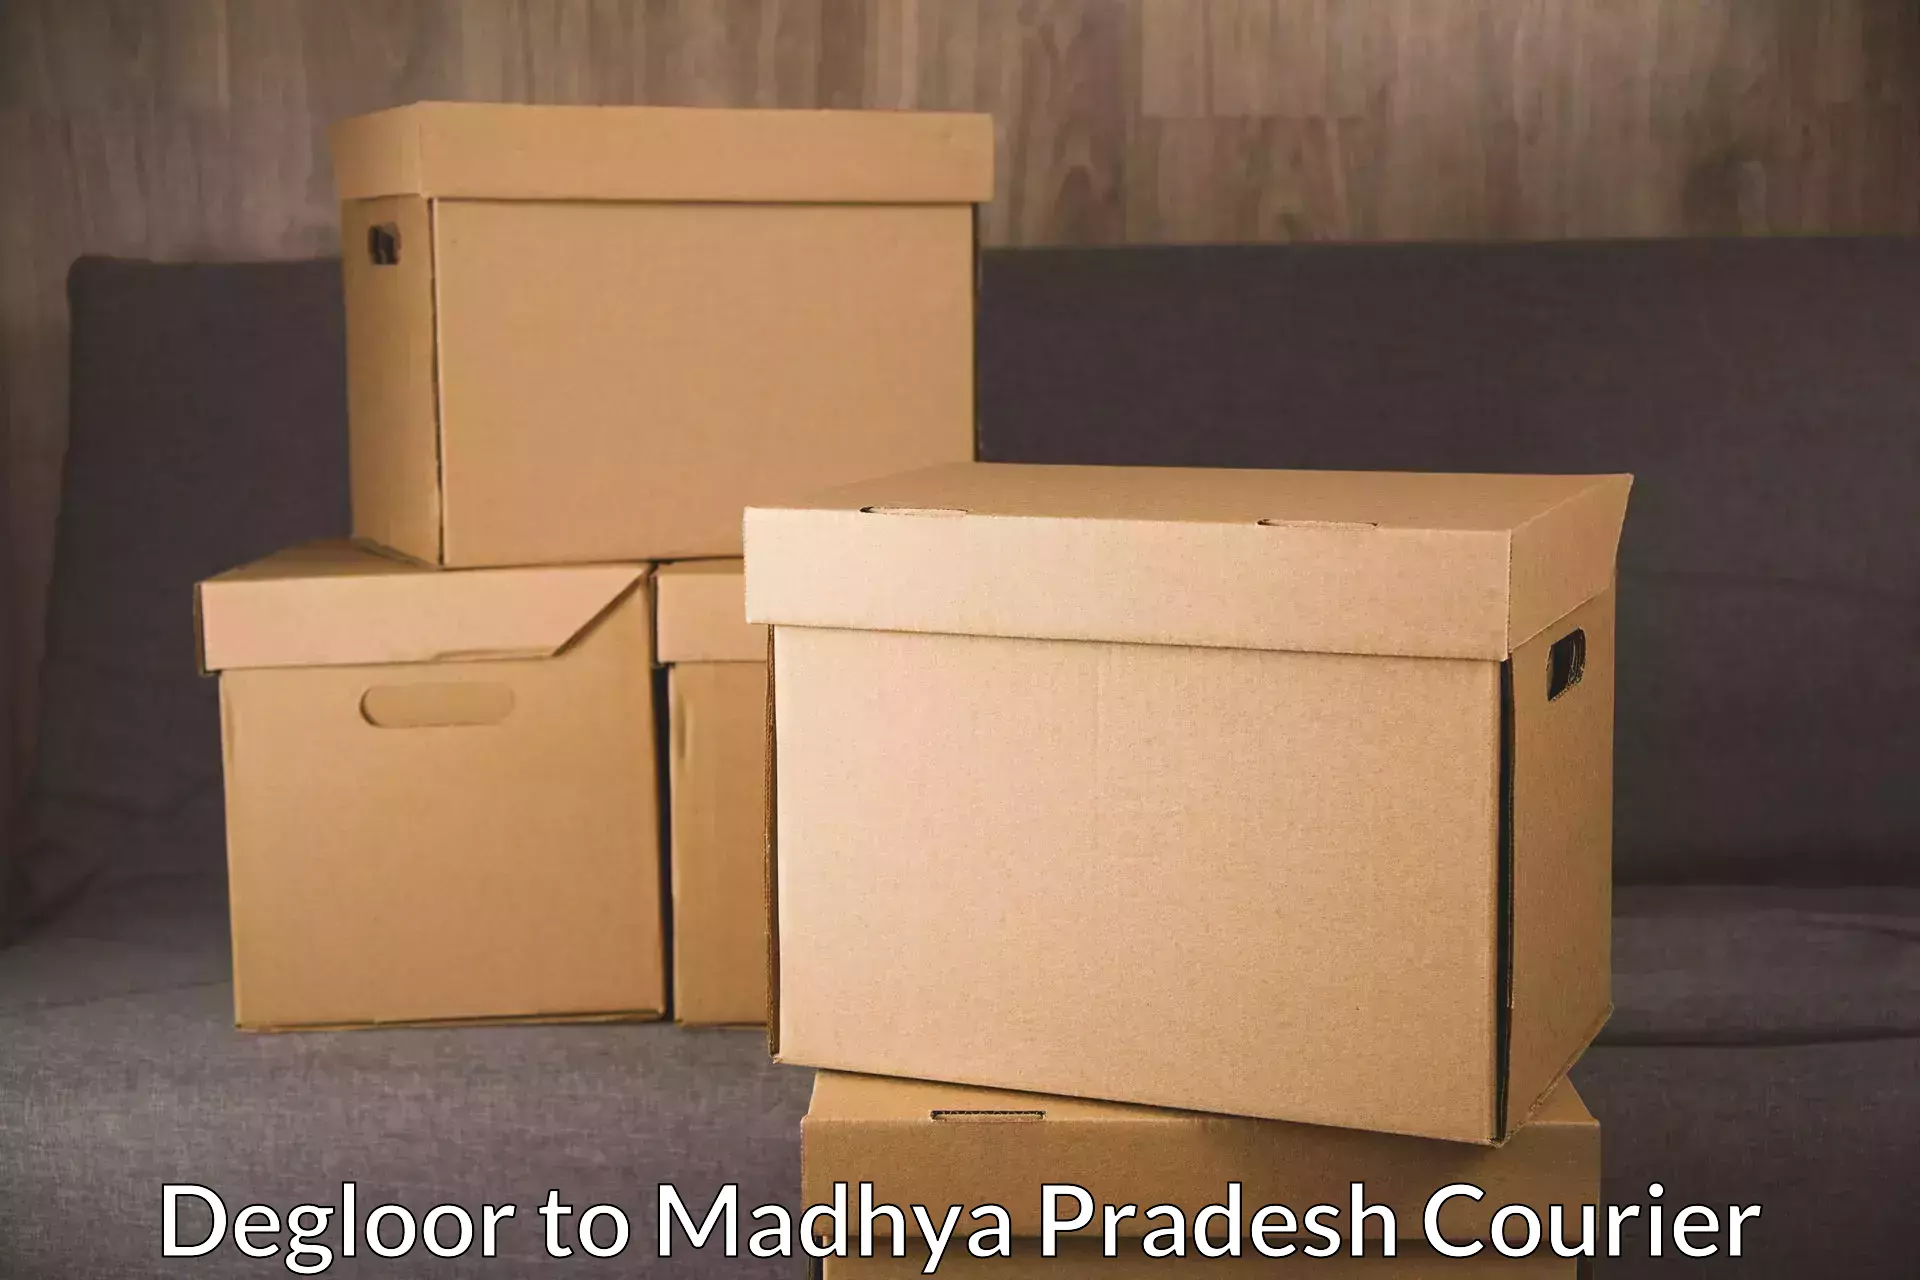 Easy access courier services Degloor to Gwalior